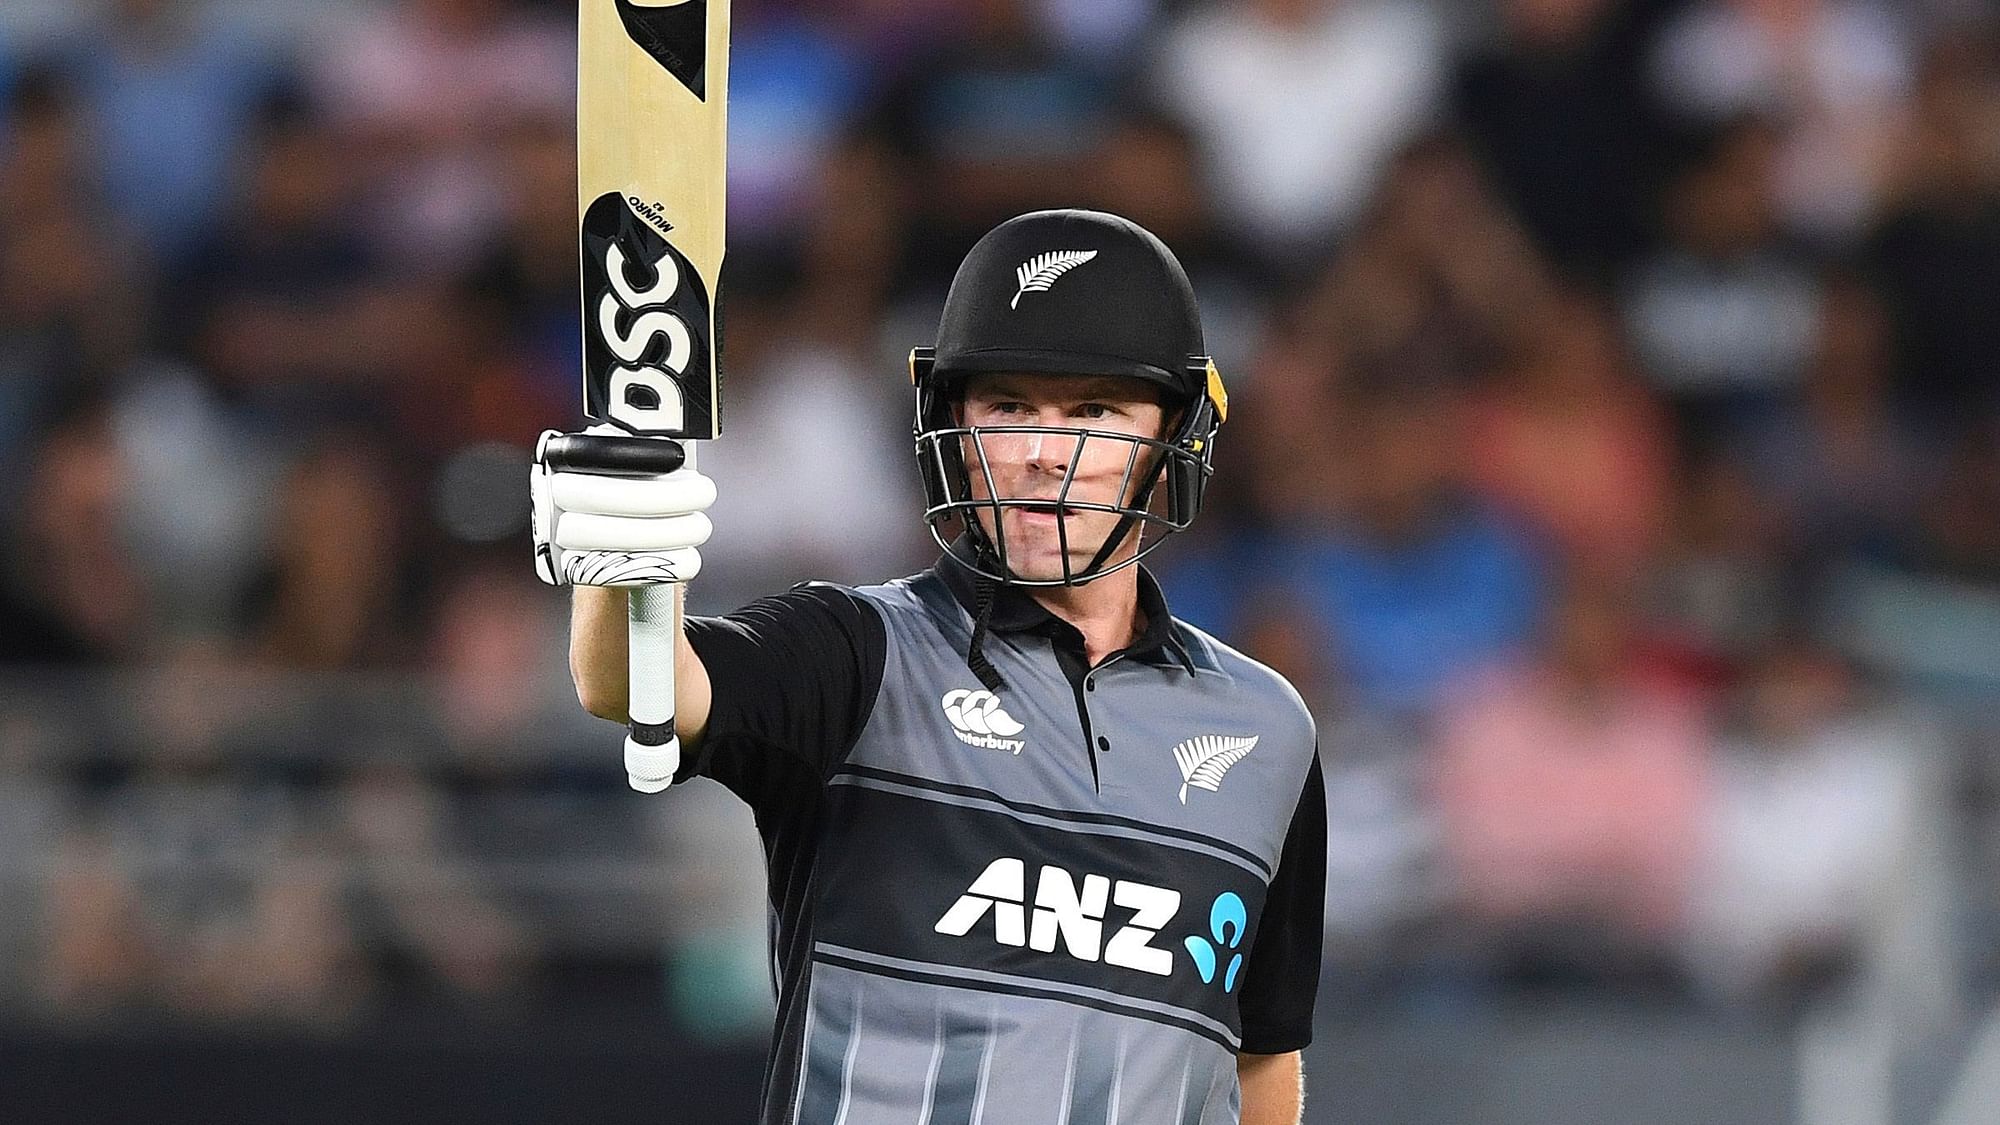 Colin Munro scored 101 vs Bangladesh on 6 January 2017 and 104 vs West Indies on 3 January 2018.